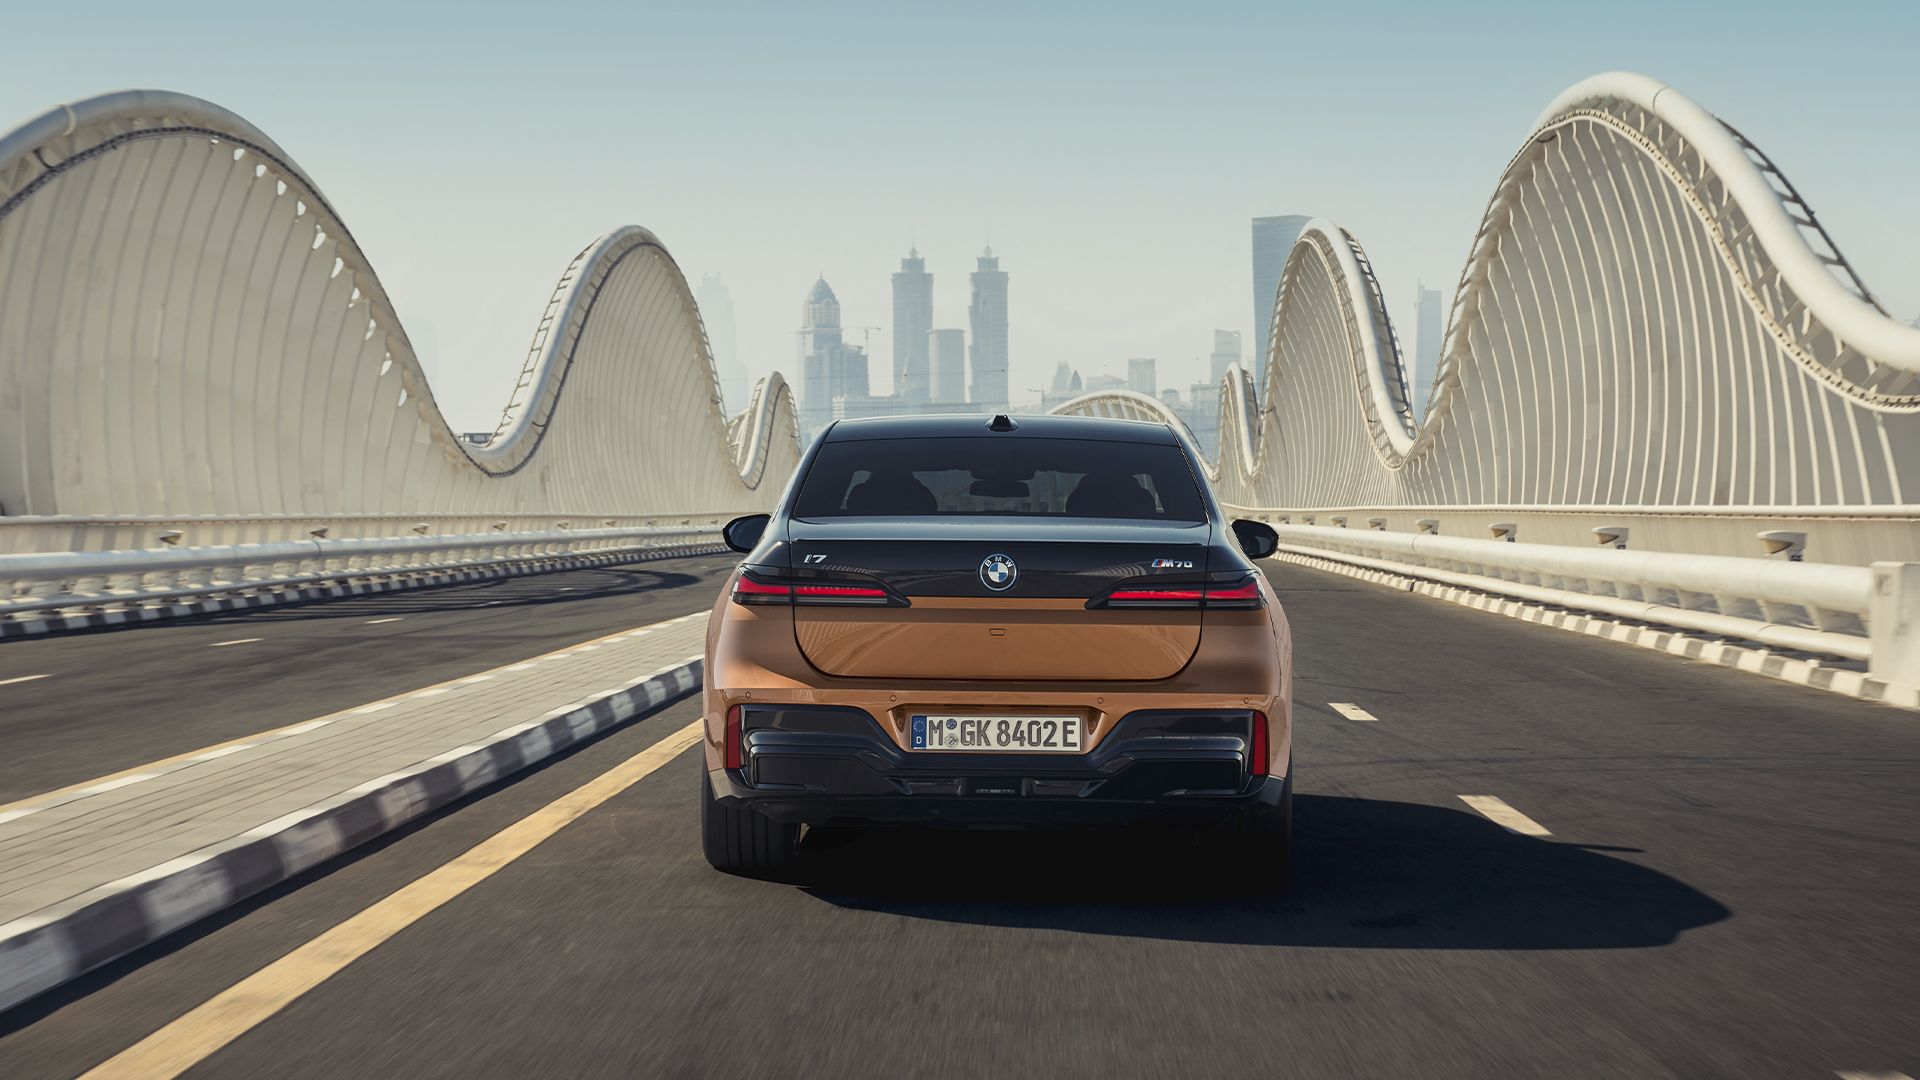 Rear view of the BMW i7 M70 xDrive